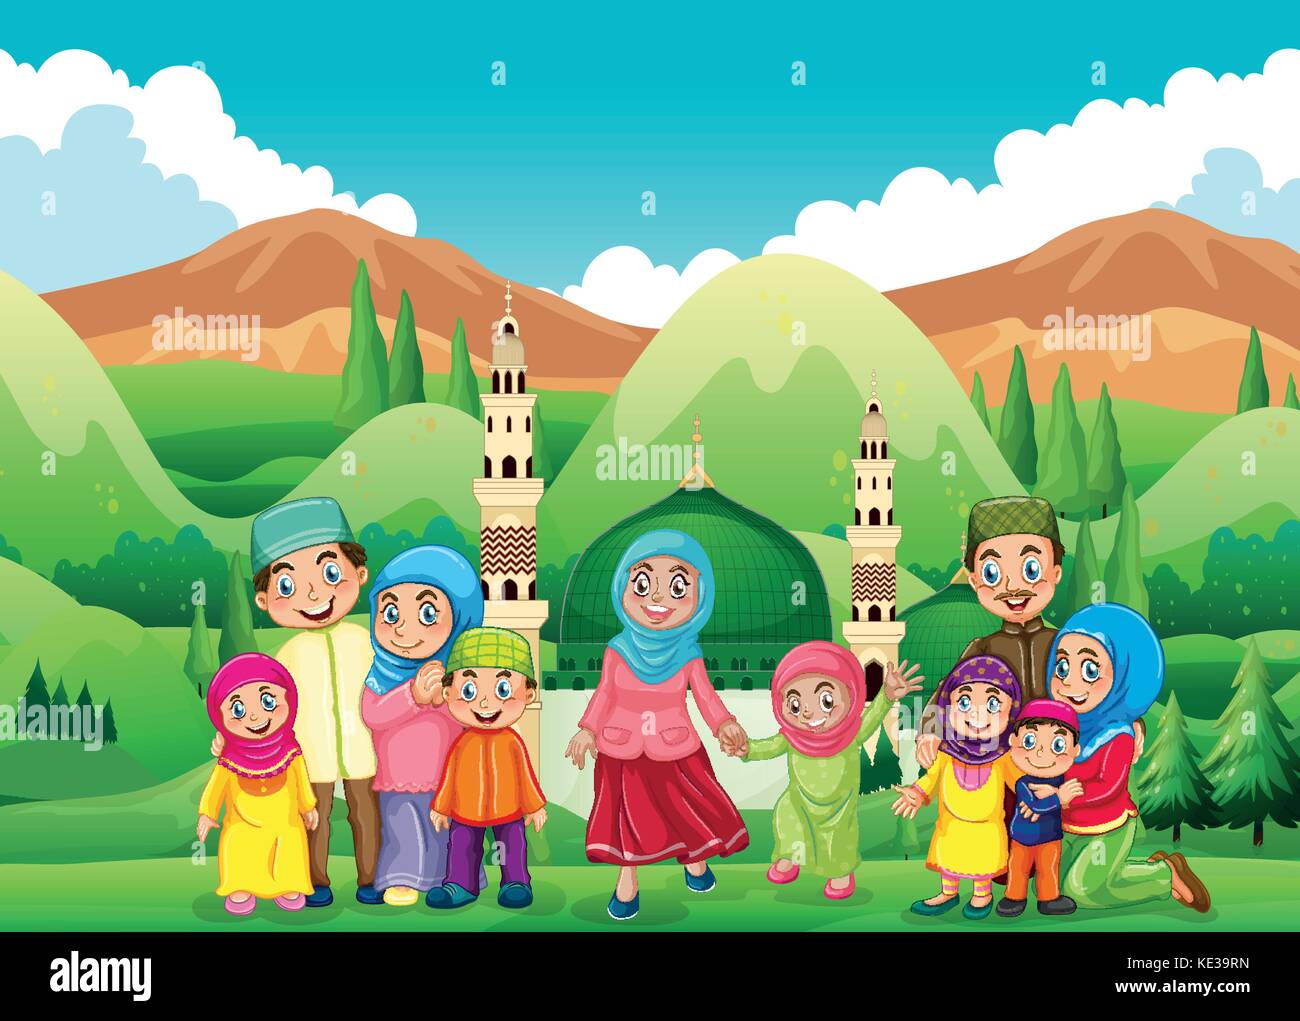 Muslim family at the mosque illustration Stock Vector